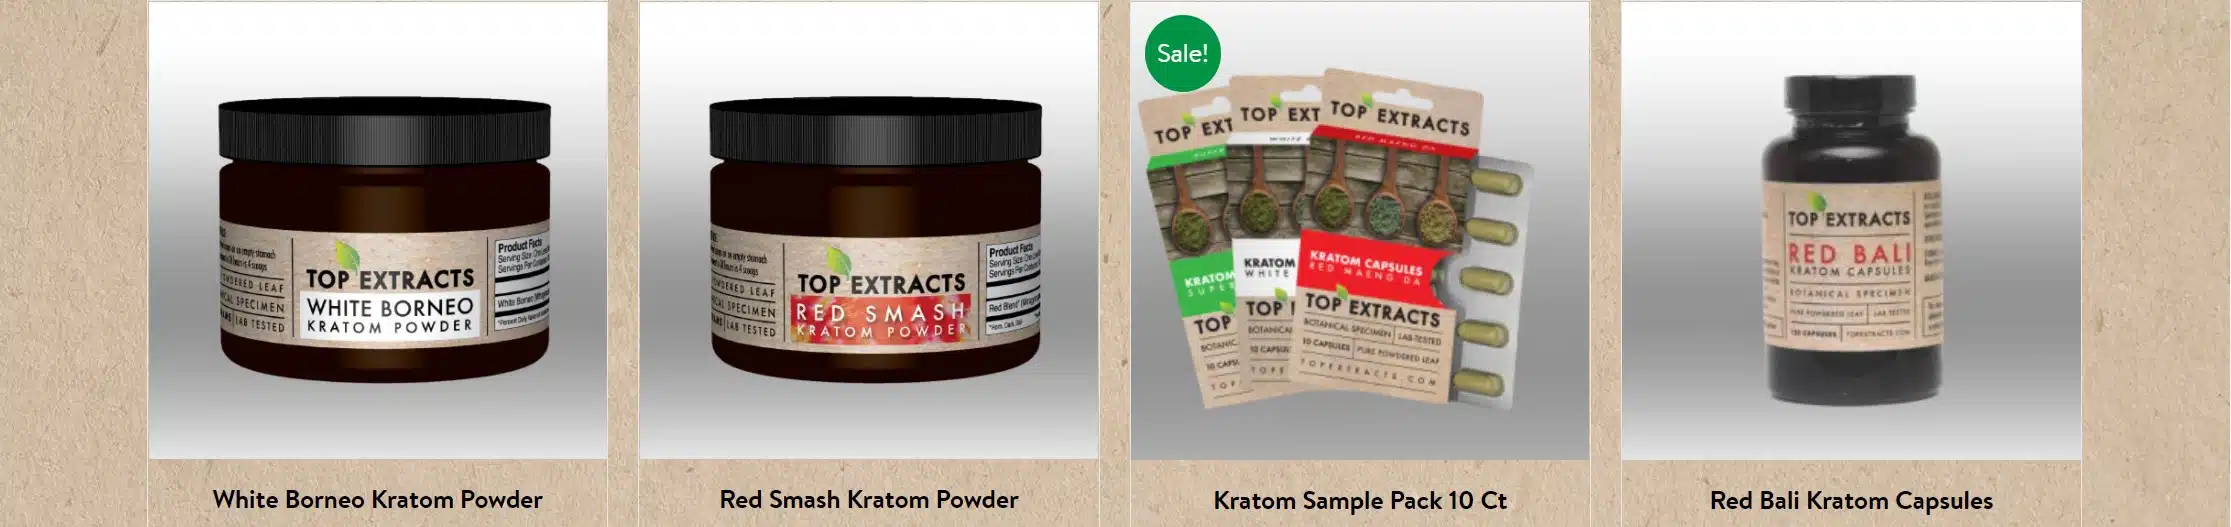 top extracts product line